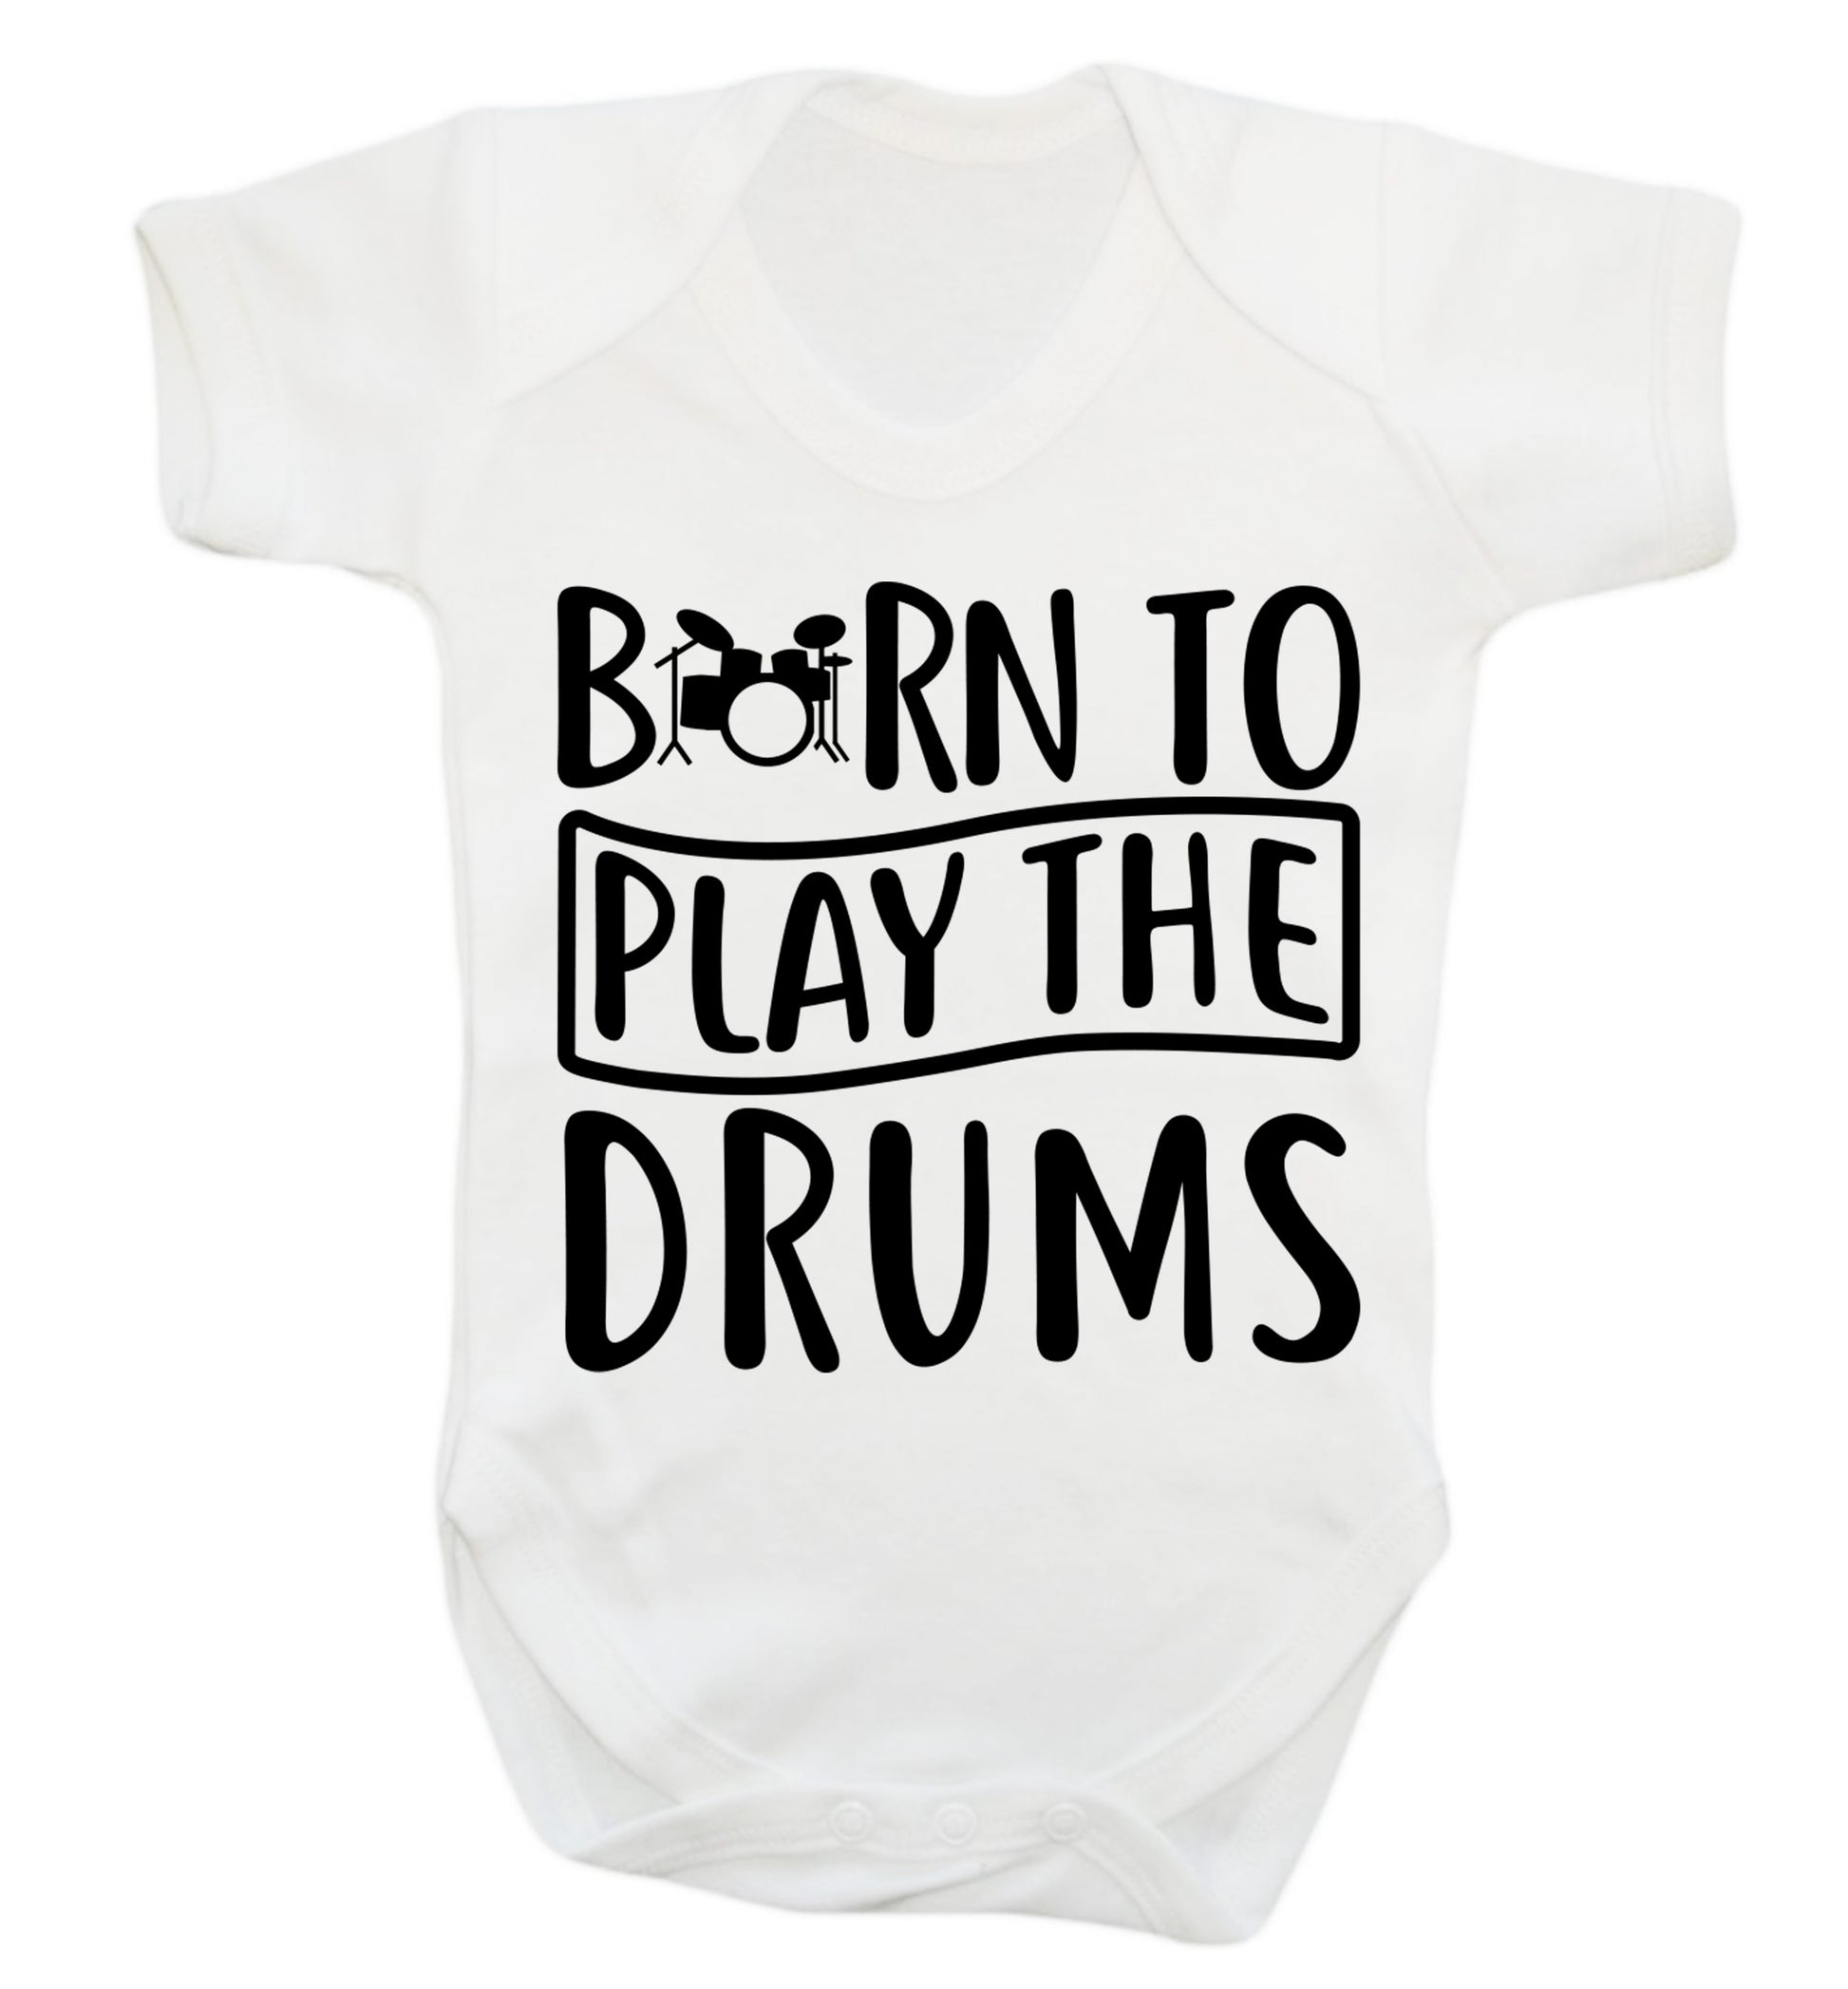 Born to play the drums Baby Vest white 18-24 months